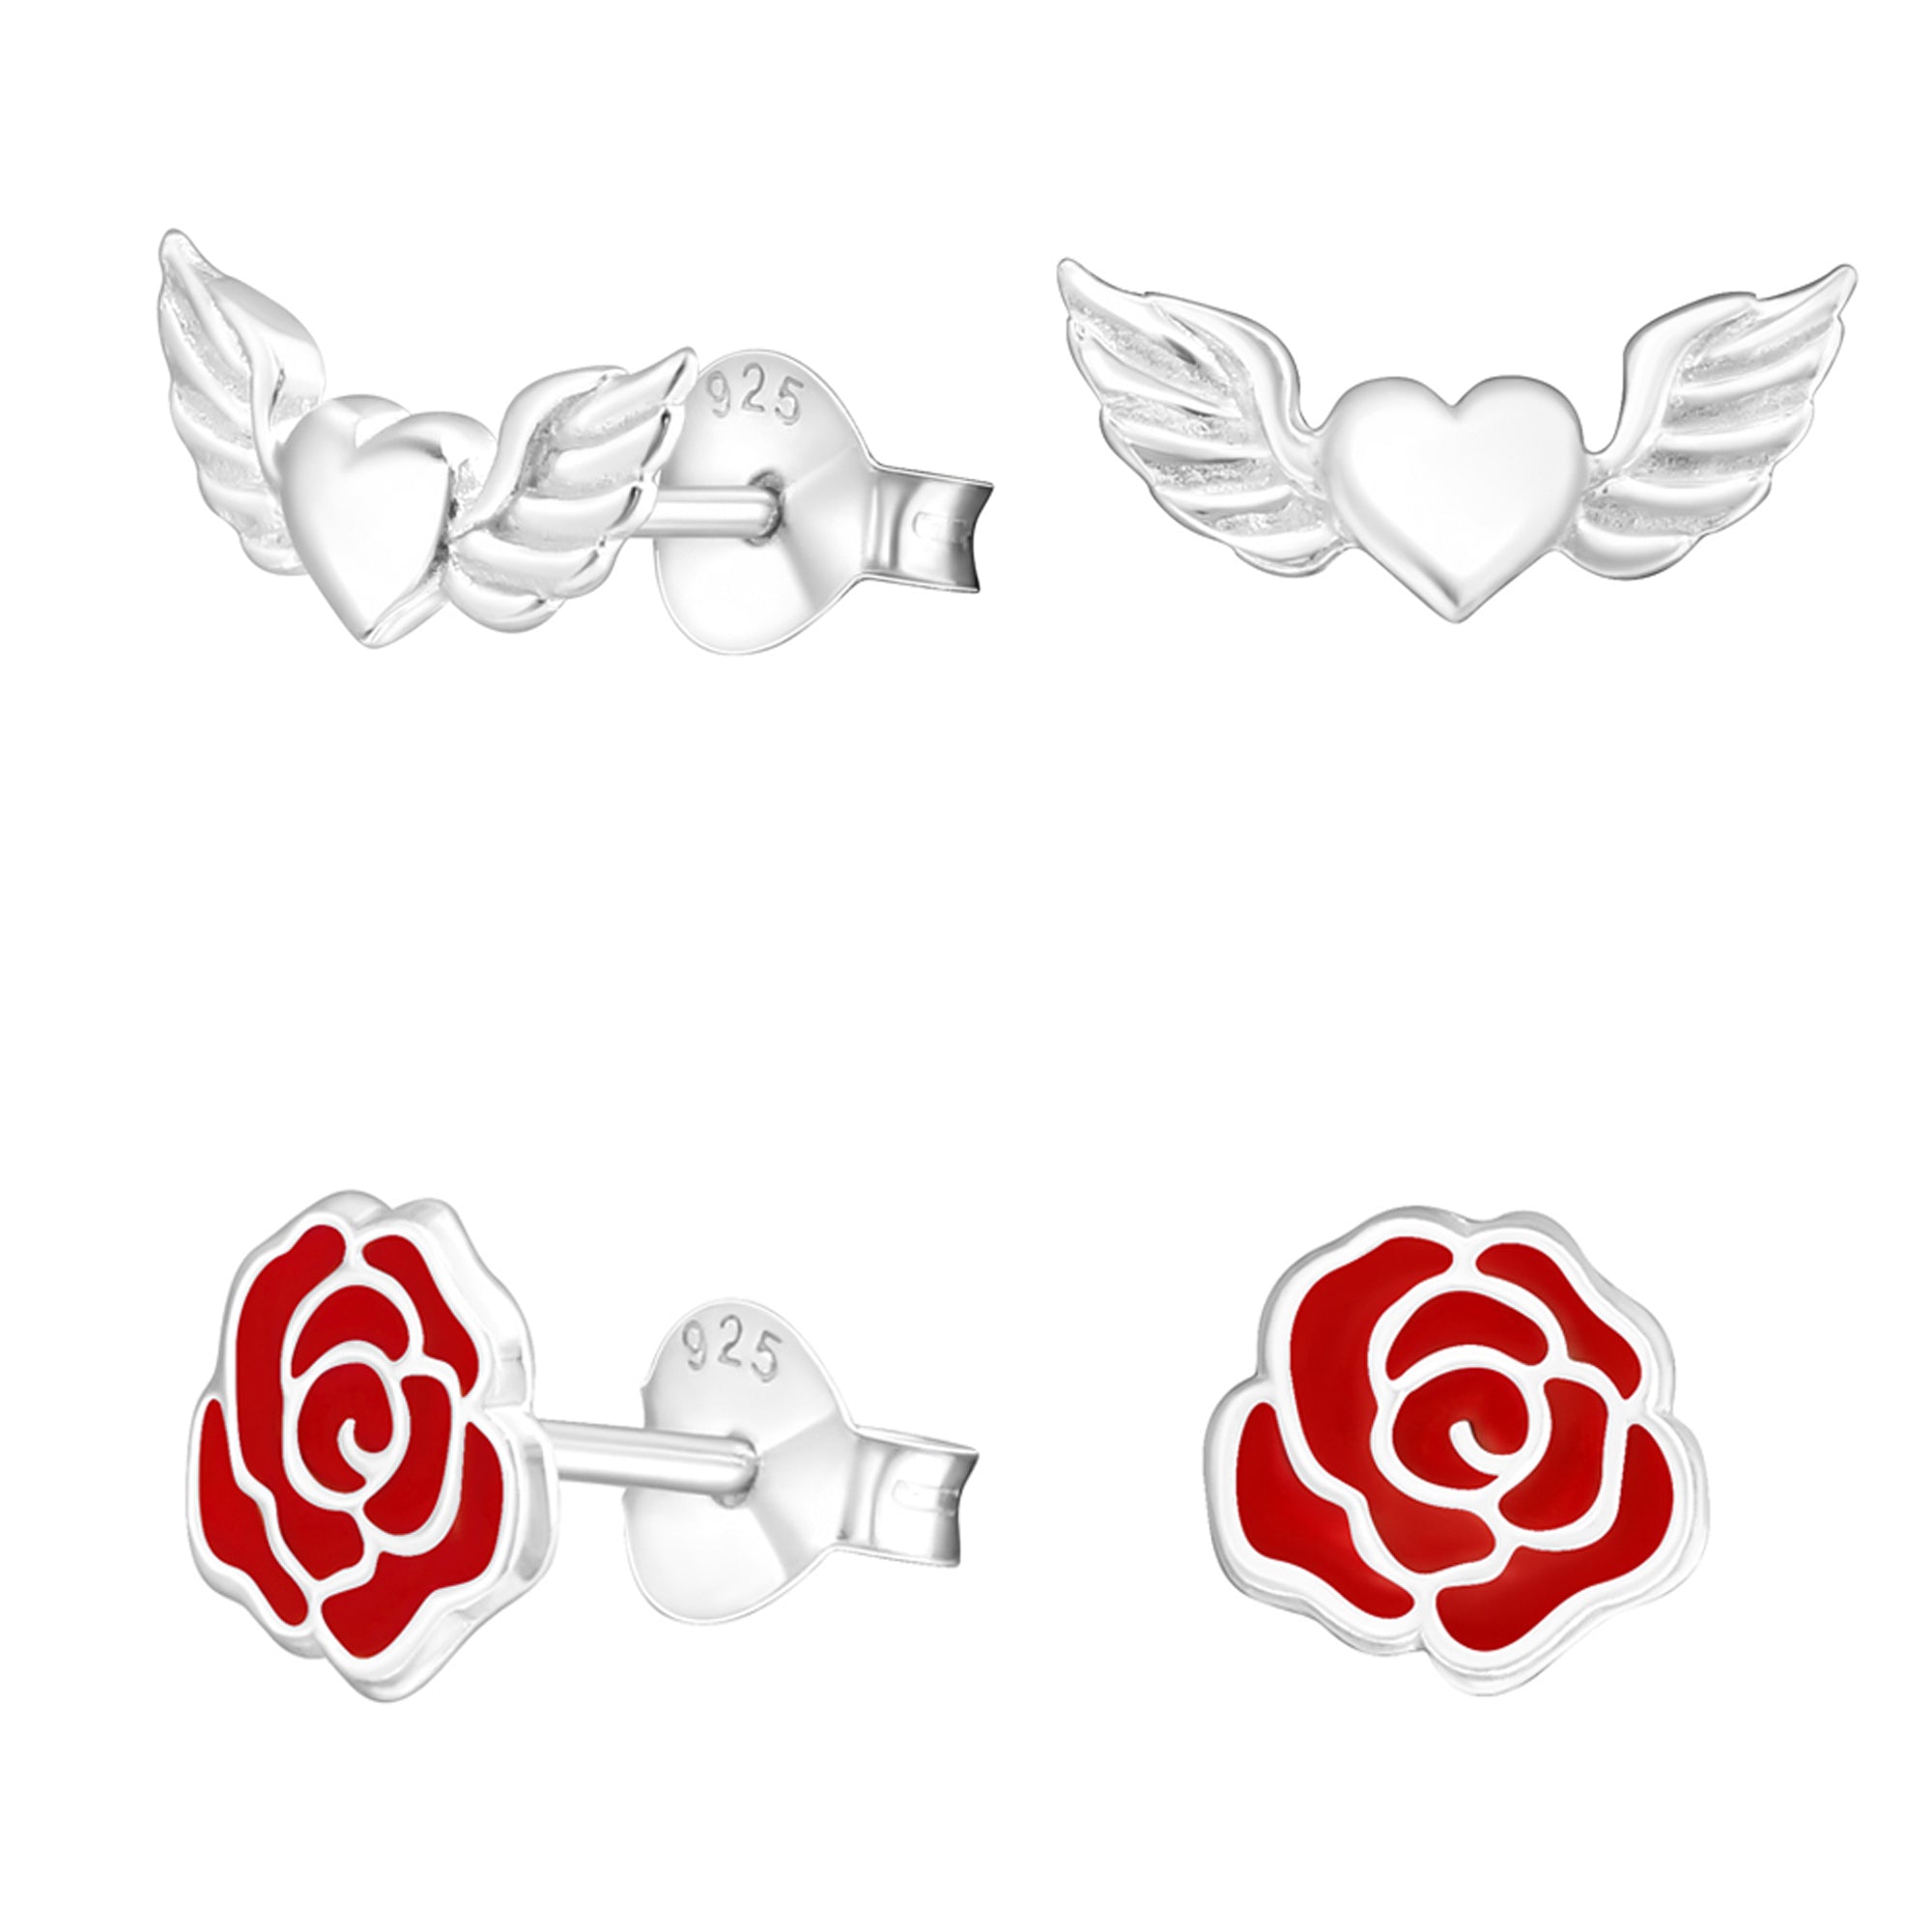 DEADBEAT Rock-Solid 925 Recycled Silver Winged Heart Ear Stud & Tattoo Rose Ear Stud Gift Pack